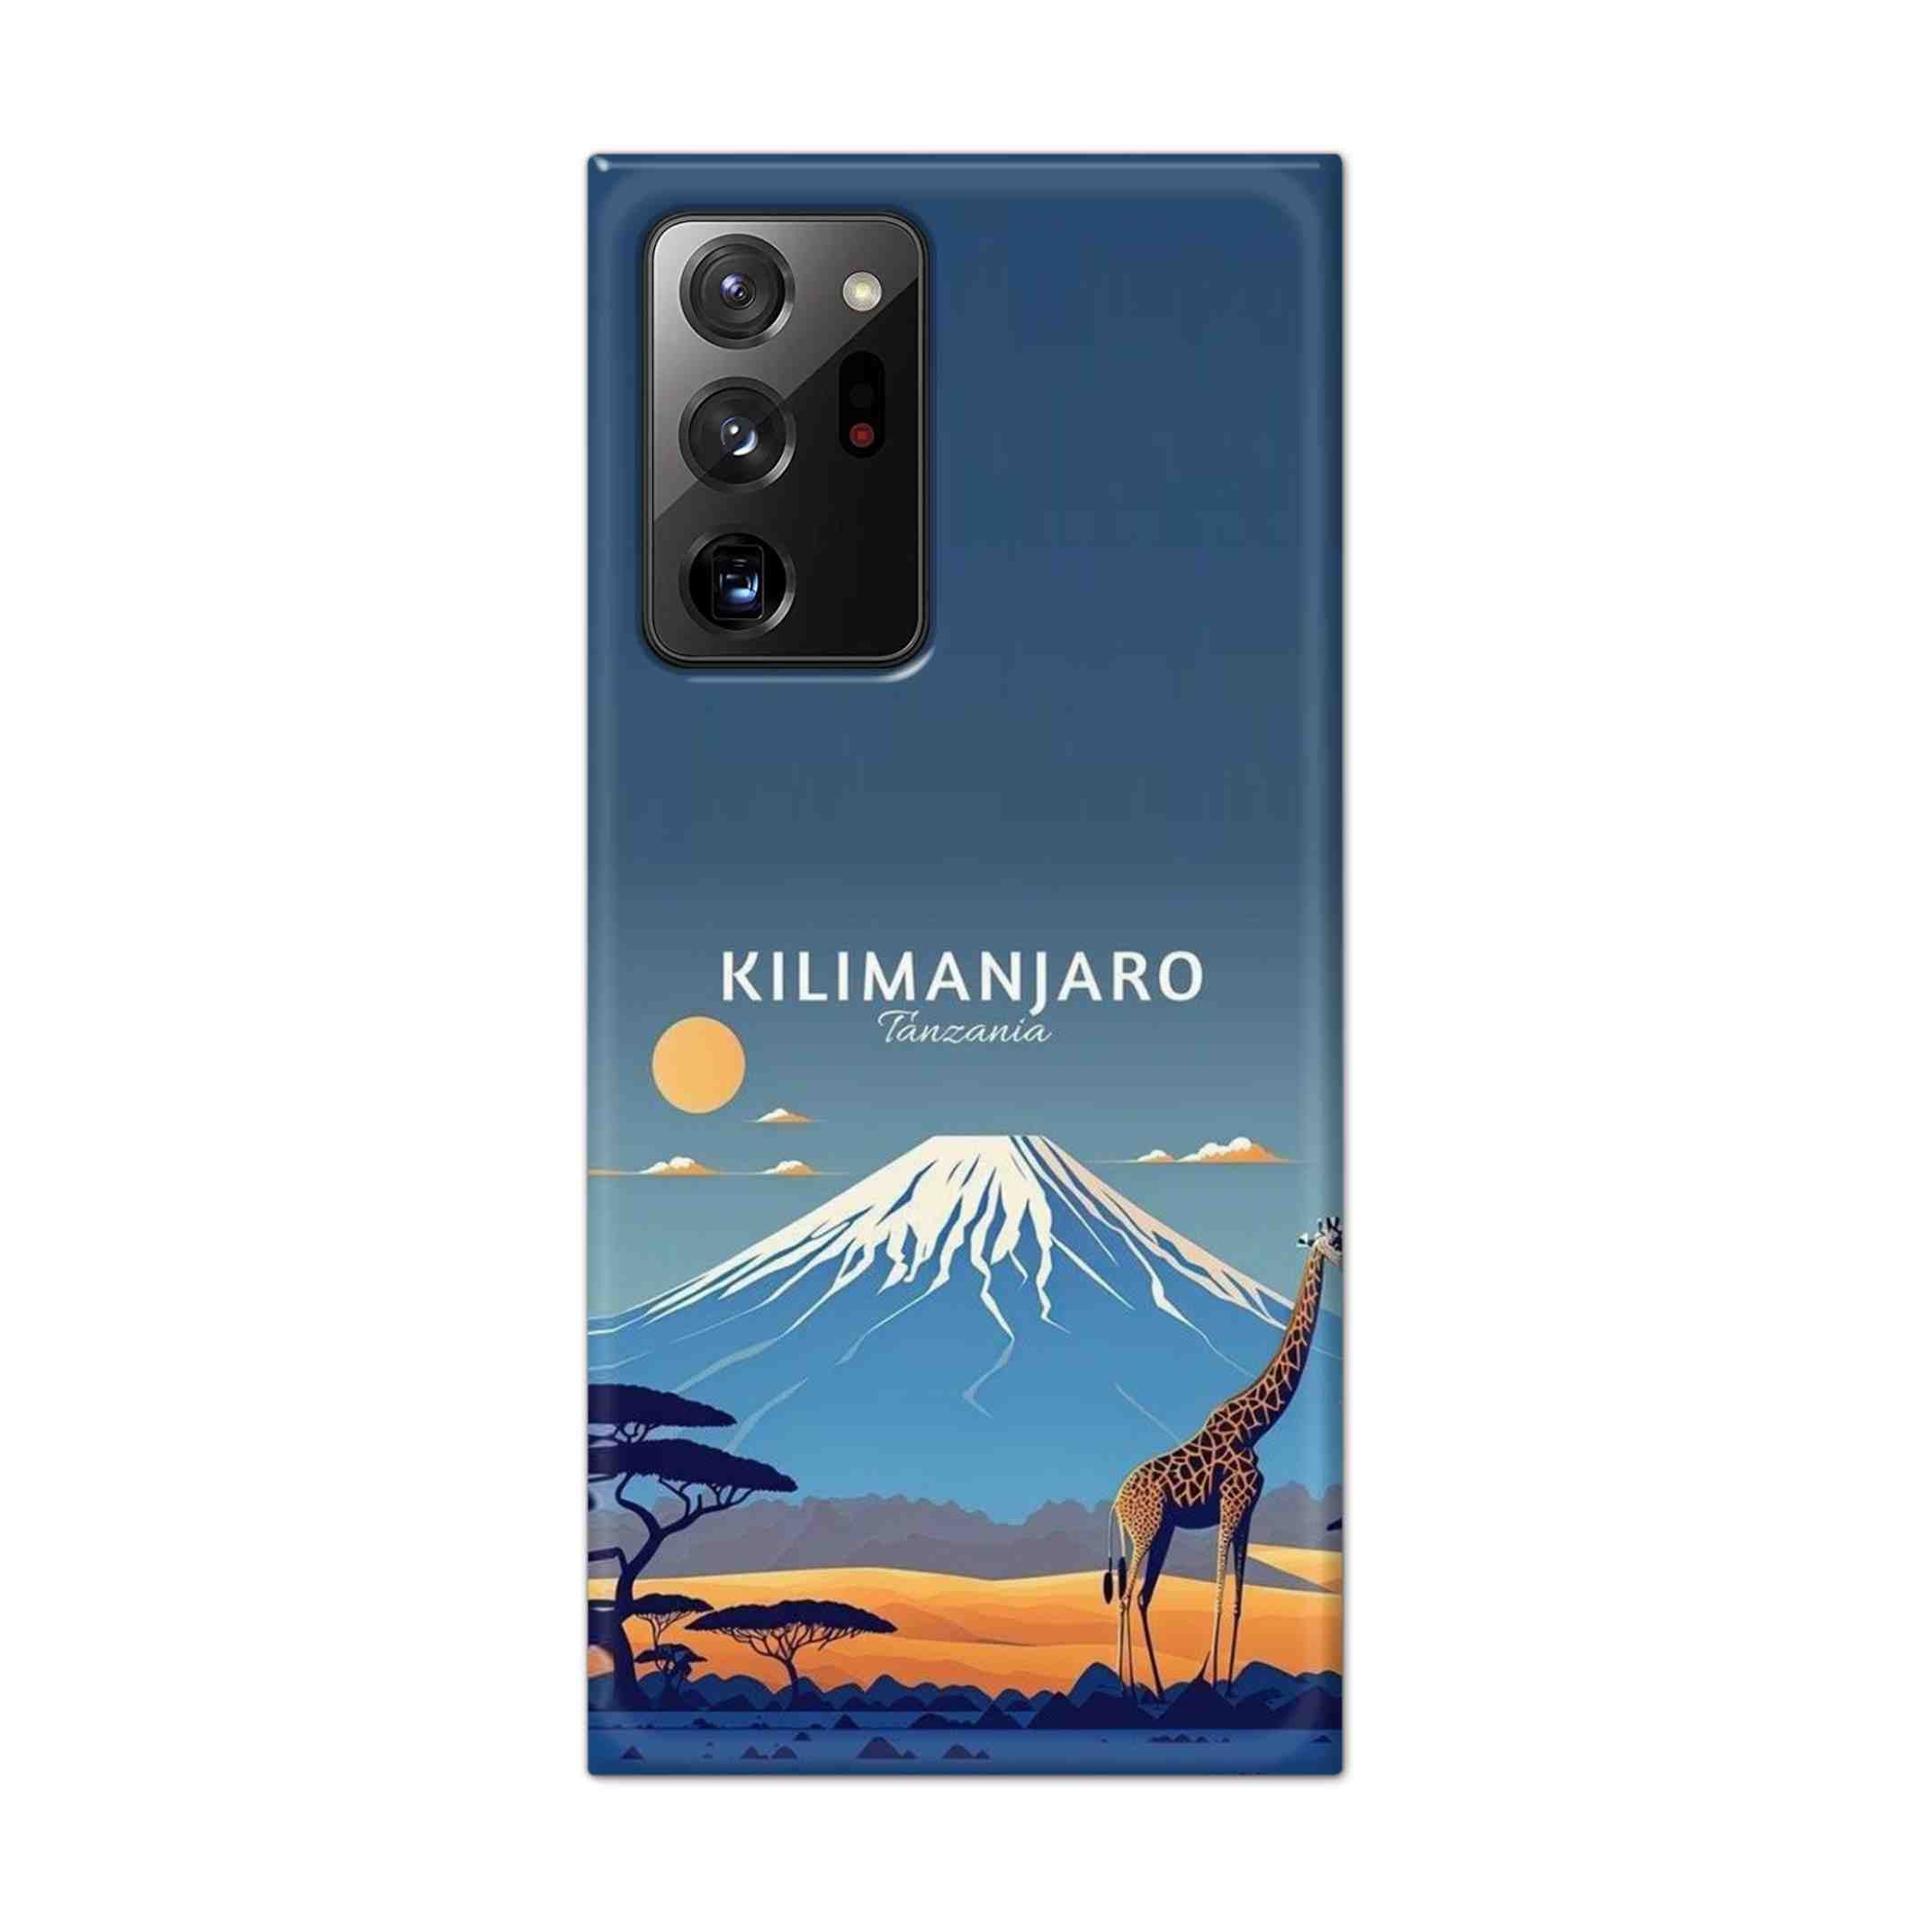 Buy Kilimanjaro Hard Back Mobile Phone Case Cover For Samsung Galaxy Note 20 Ultra Online